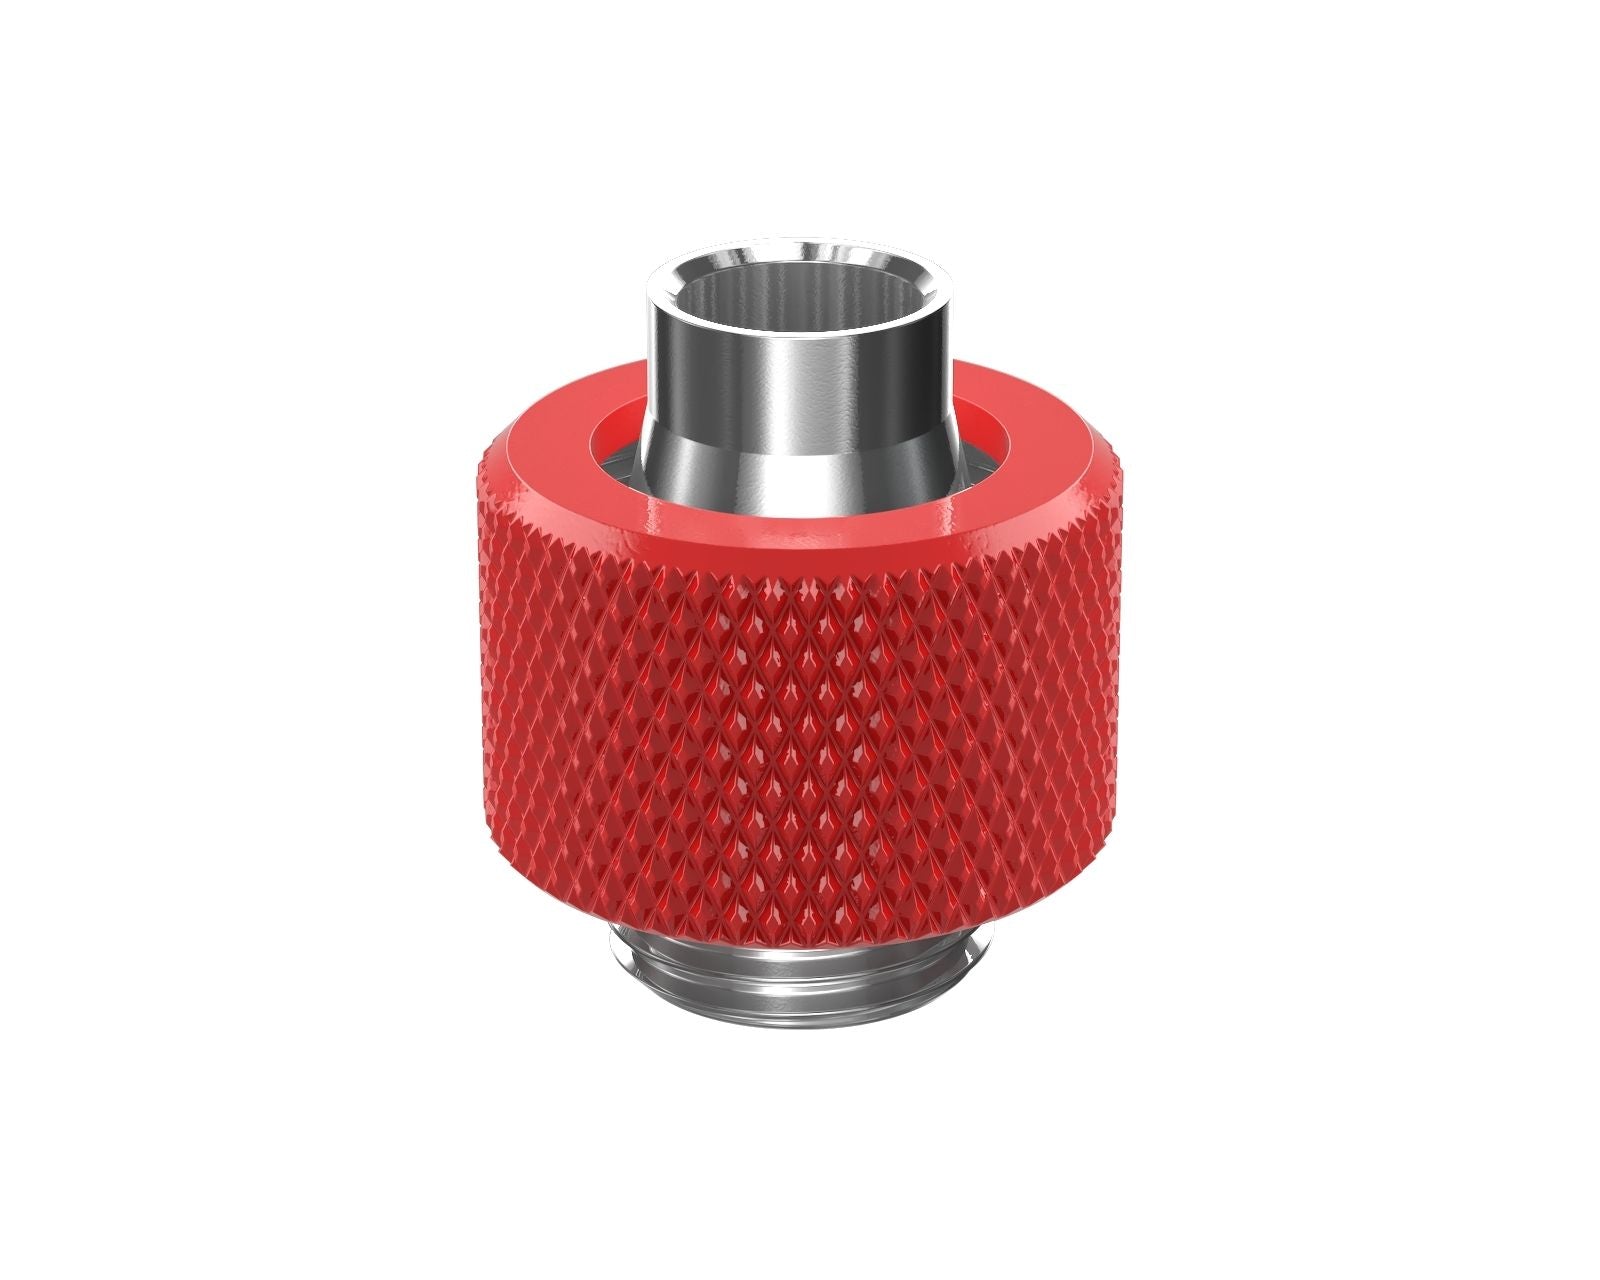 PrimoChill SecureFit SX - Premium Compression Fitting For 3/8in ID x 1/2in OD Flexible Tubing (F-SFSX12) - Available in 20+ Colors, Custom Watercooling Loop Ready - Razor Red